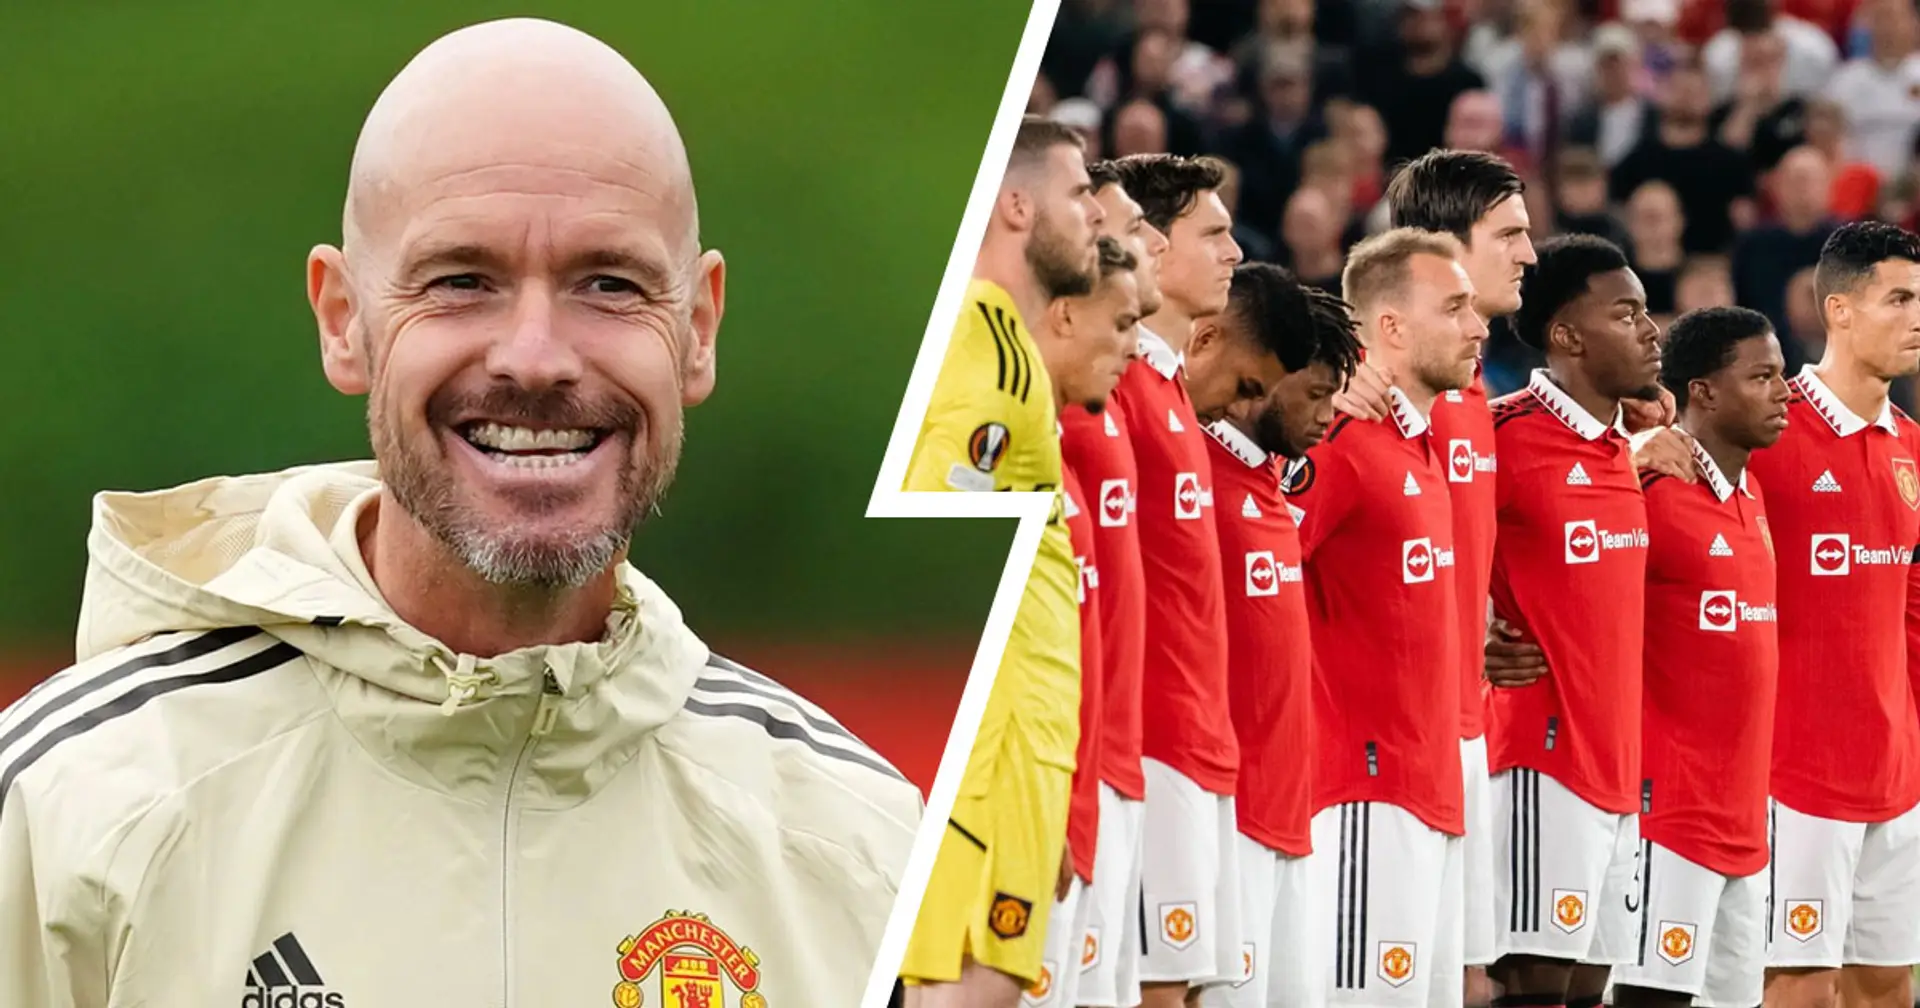 Ten Hag asked two United new signings to 'take it easy' on each other in training